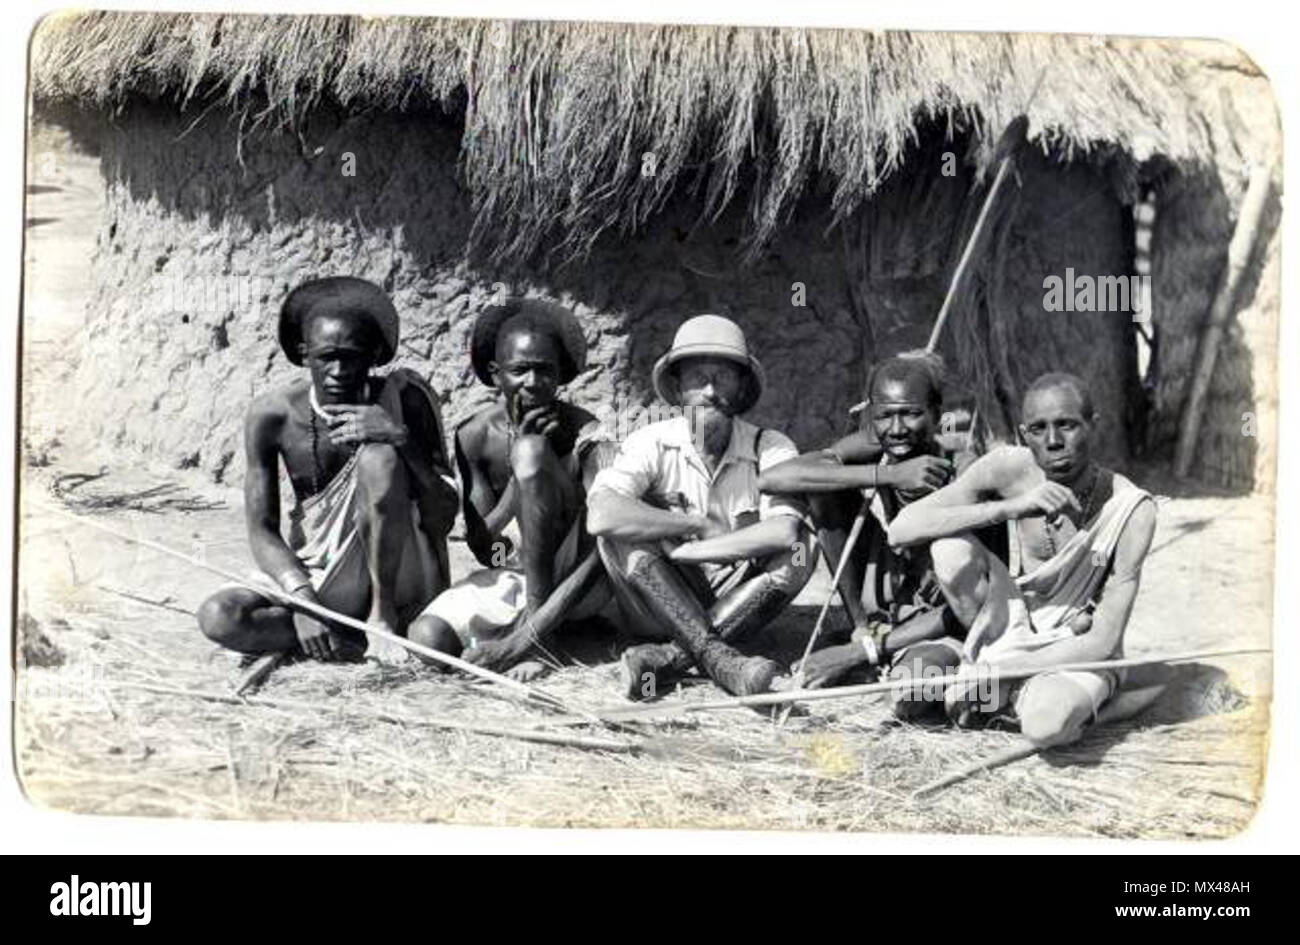 . Kazimierz Nowak among men from Shilluk tribe (near Malakal town, South Sudan, Africa). The photo probably taken by Kazimierz Nowak (1897-1937) during his trip through Africa - a Polish traveller, correspondent and photographer. Probably the first man in the world who crossed Africa alone from the North to the South and from the South to the North (from 1931 to 1936; on foot, by bicycle and canoe). . circa about 1931-36. probably Kazimierz Nowak or an unknown author 42 Among Shillukian people Stock Photo